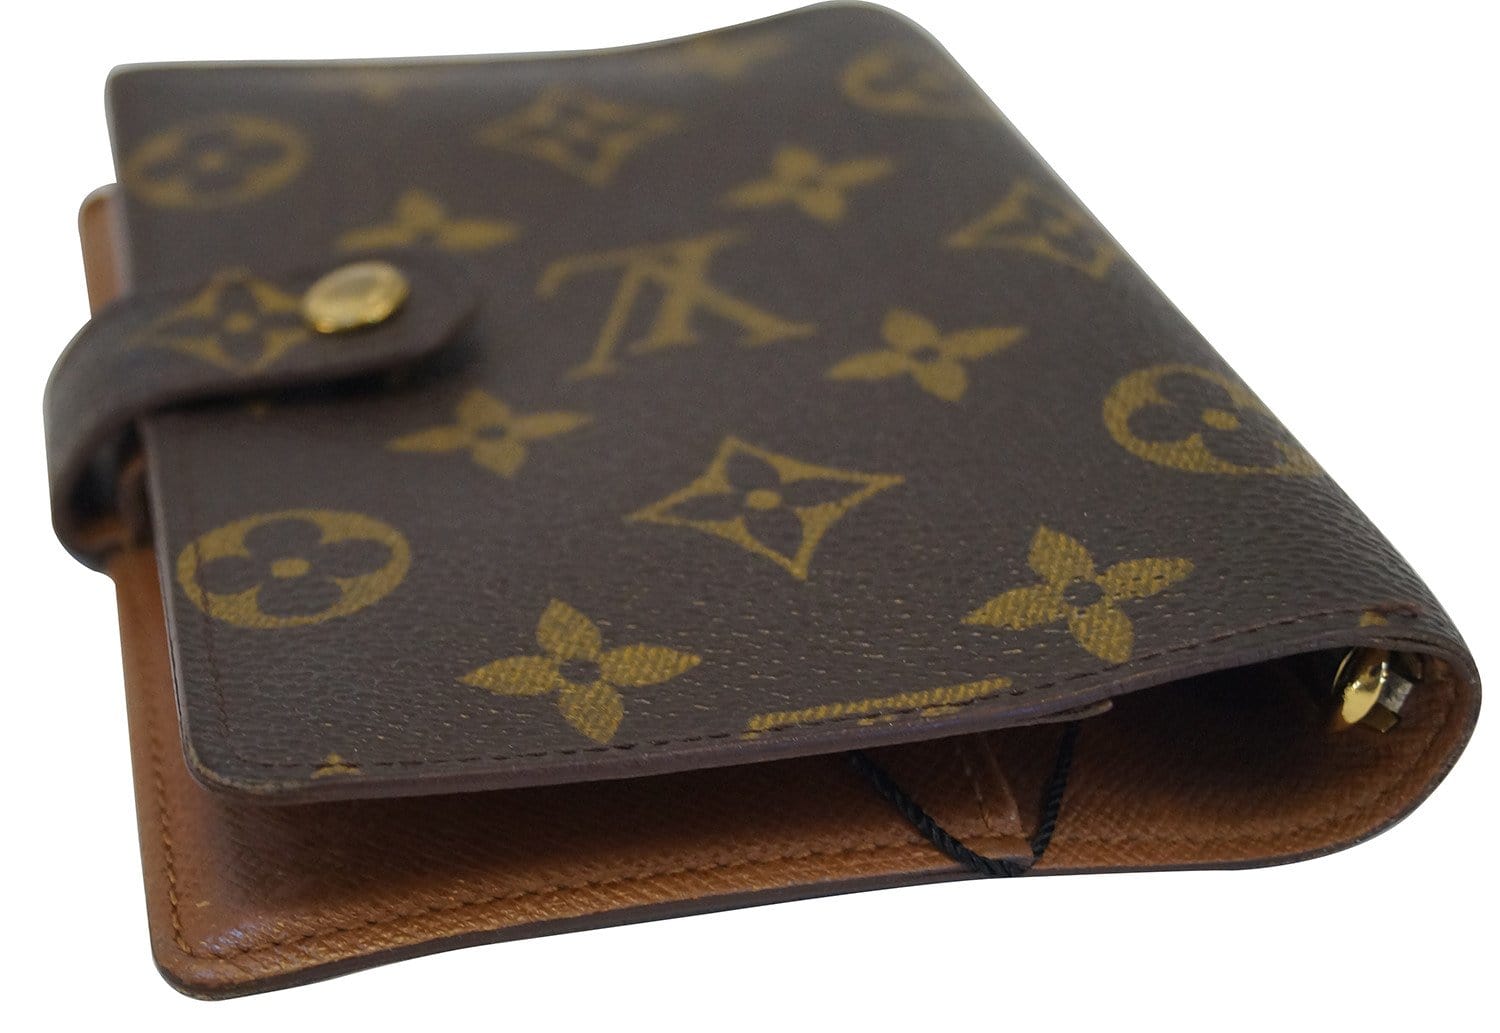 Authentic Louis Vuitton Monogram Agenda PM Day Planner Cover with